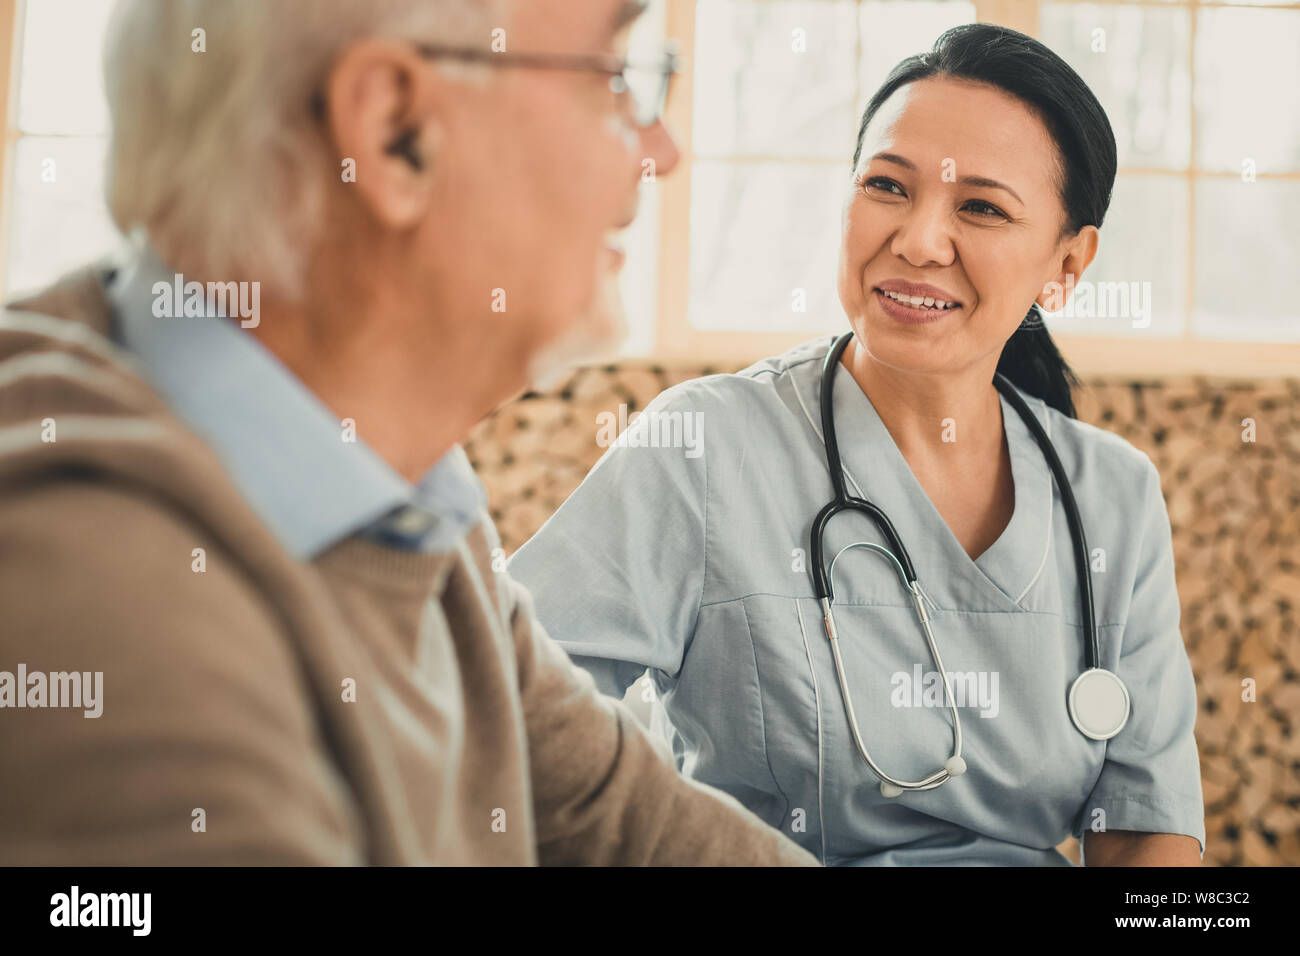 Smiling kind female doctor looking on her old patient Stock Photo